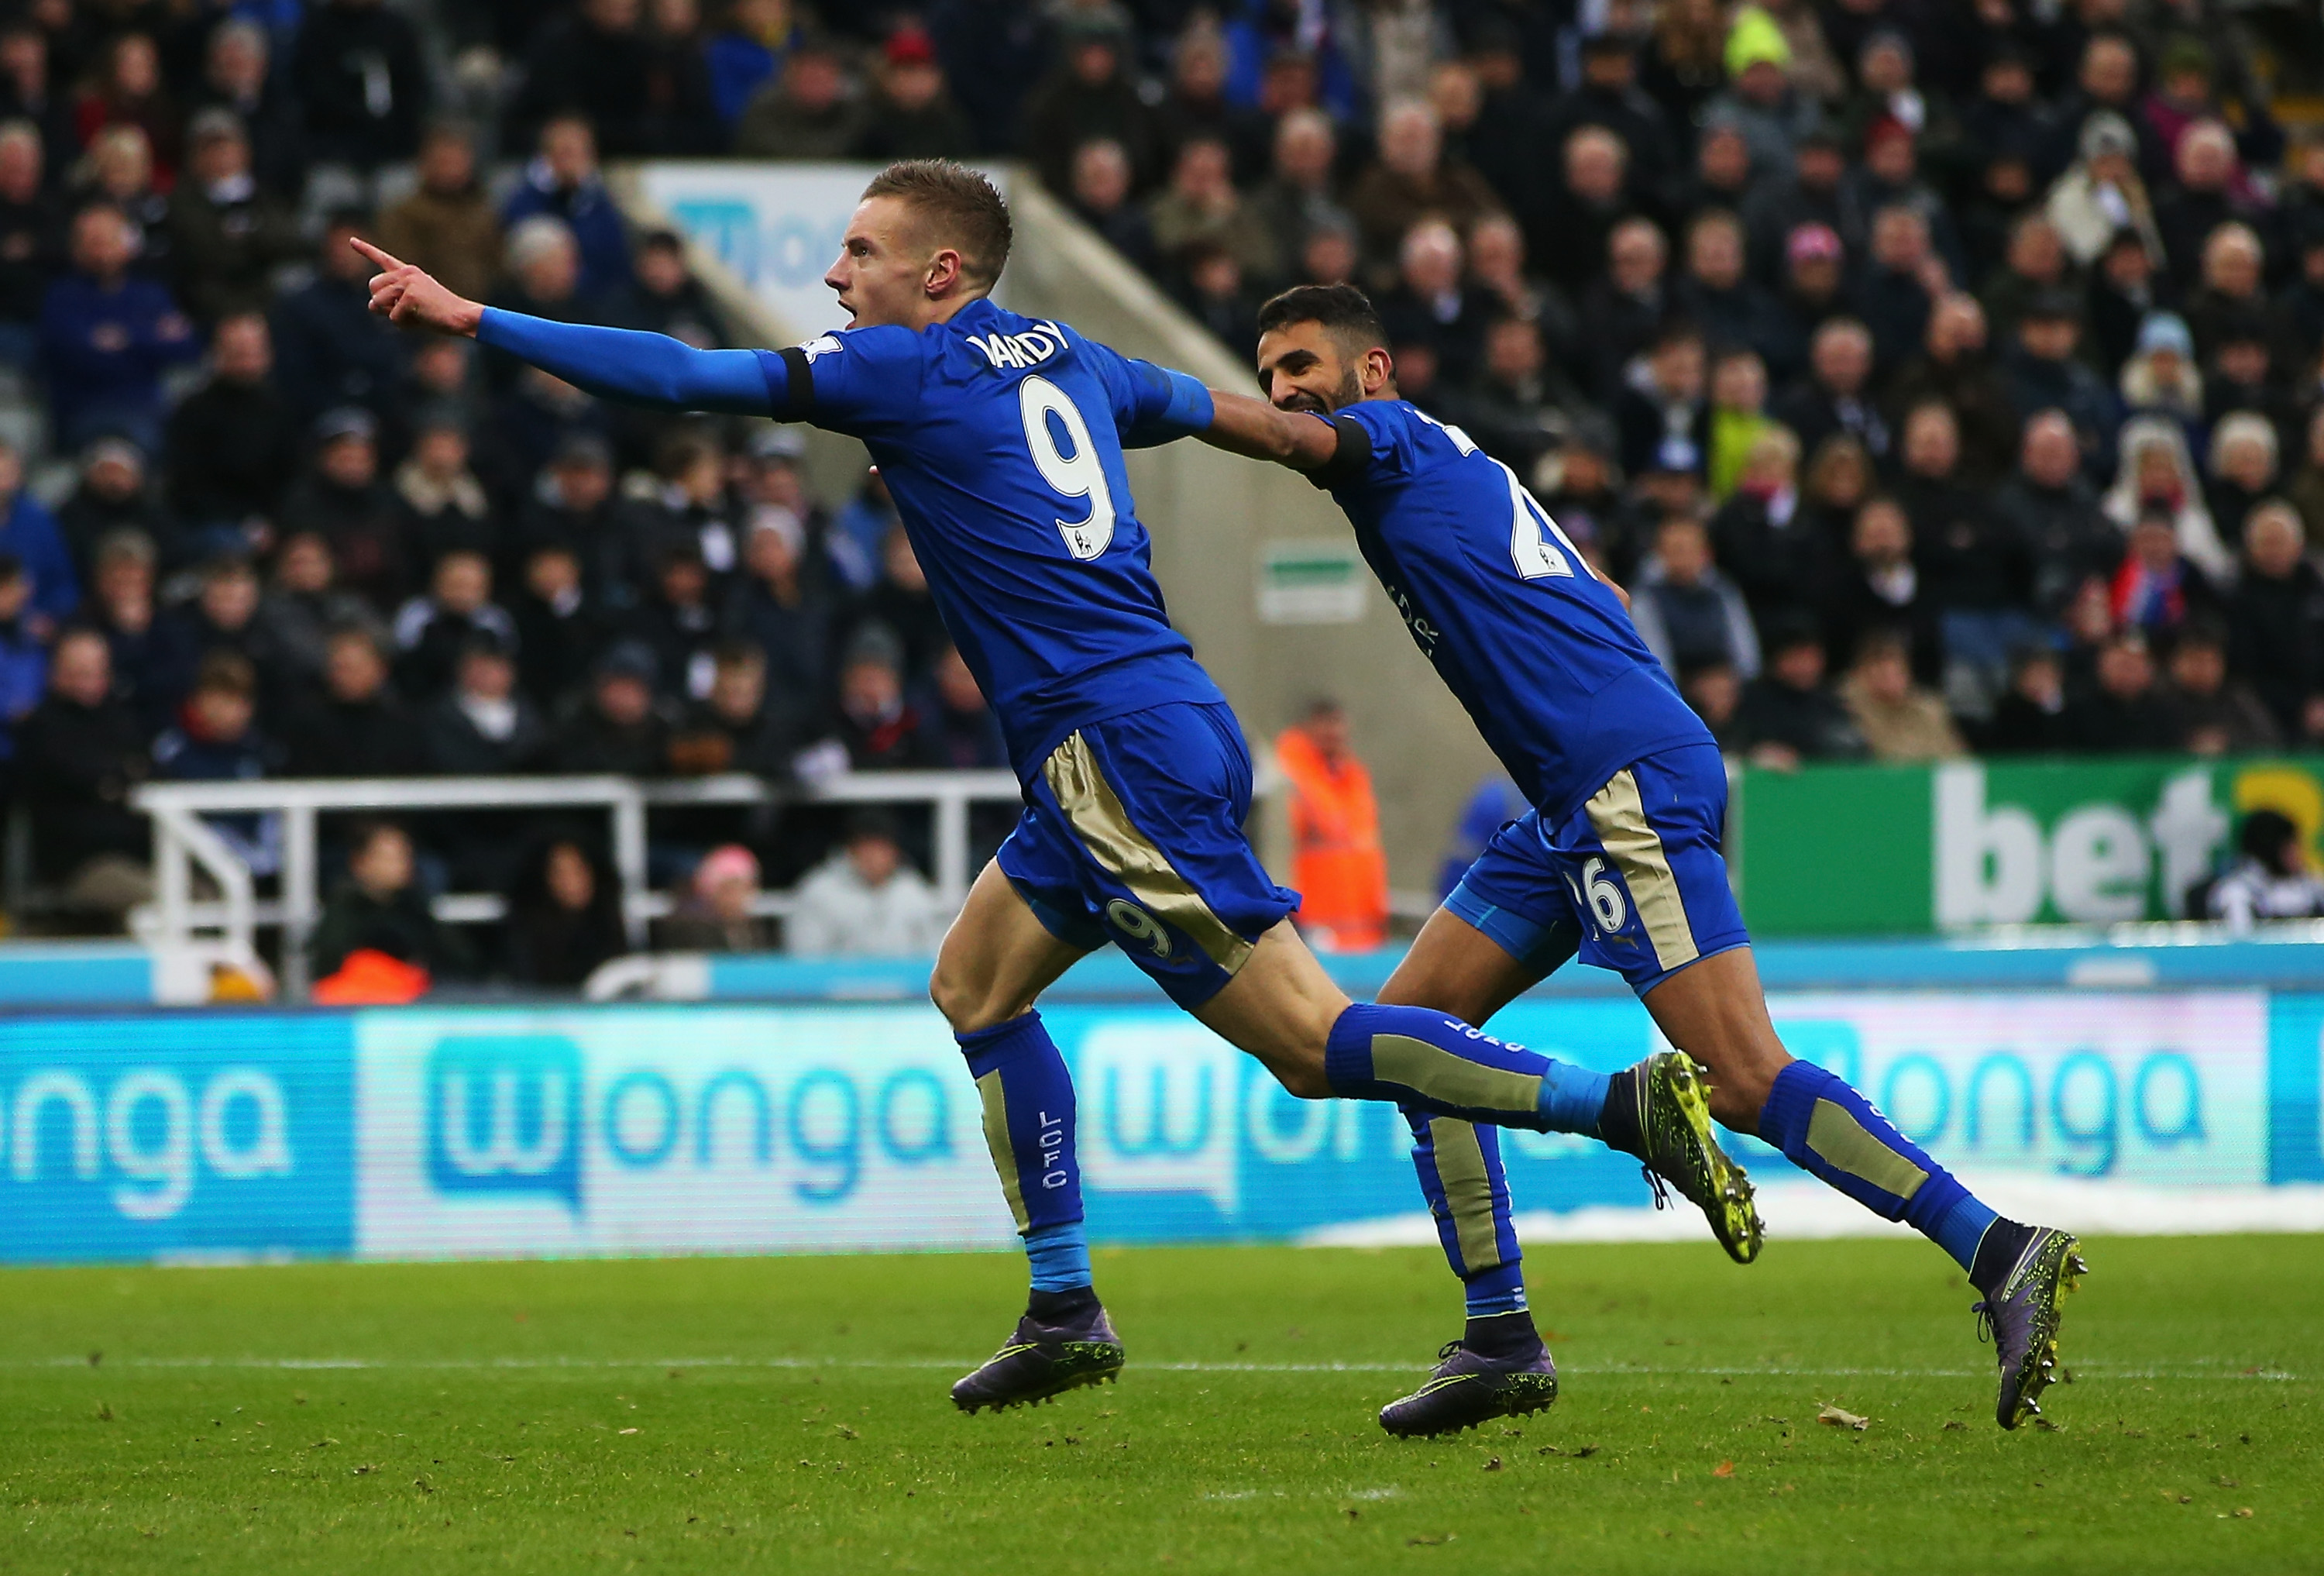 NEWCASTLE UPON TYNE, ENGLAND - NOVEMBER 21: Jamie Vardy (L) of Leicester City celebrates scoring his team's first goal with his team mate Riyad Mahrez (R) during the Barclays Premier League match between Newcastle United and Leicester City at St James' Park on November 21, 2015 in Newcastle upon Tyne, England. (Photo by Ian MacNicol/Getty Images)